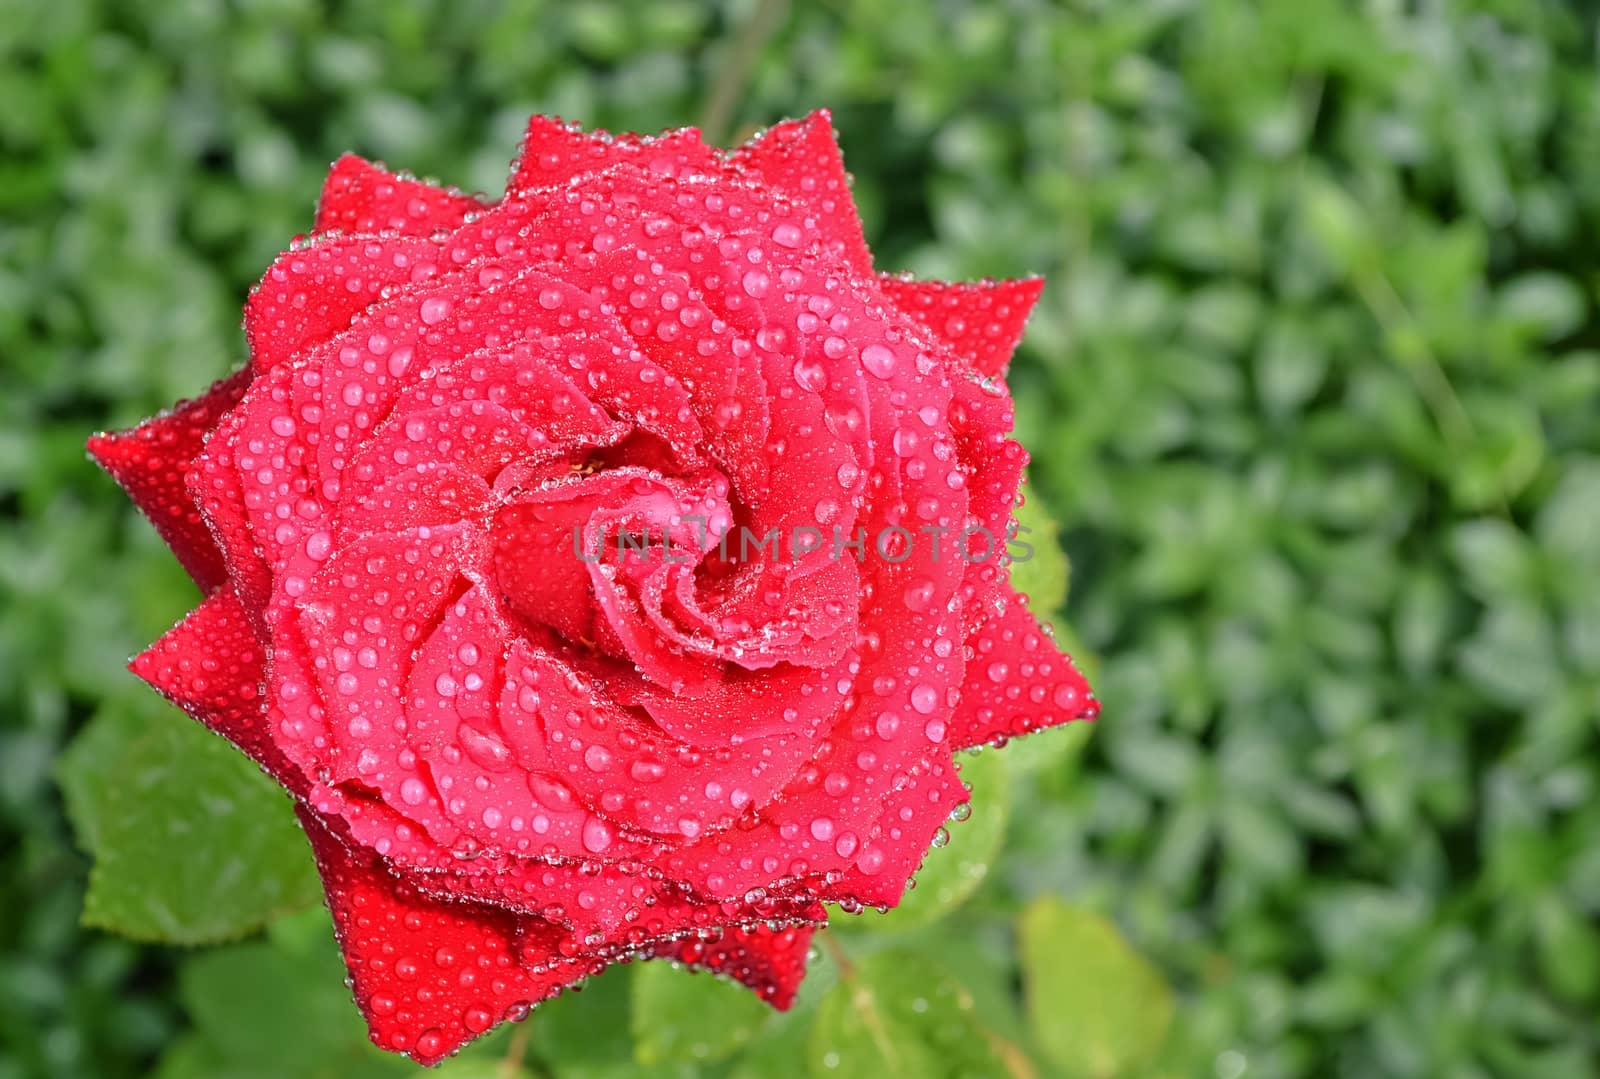 Red rose, flowers on a grass background with drops of water by Gaina